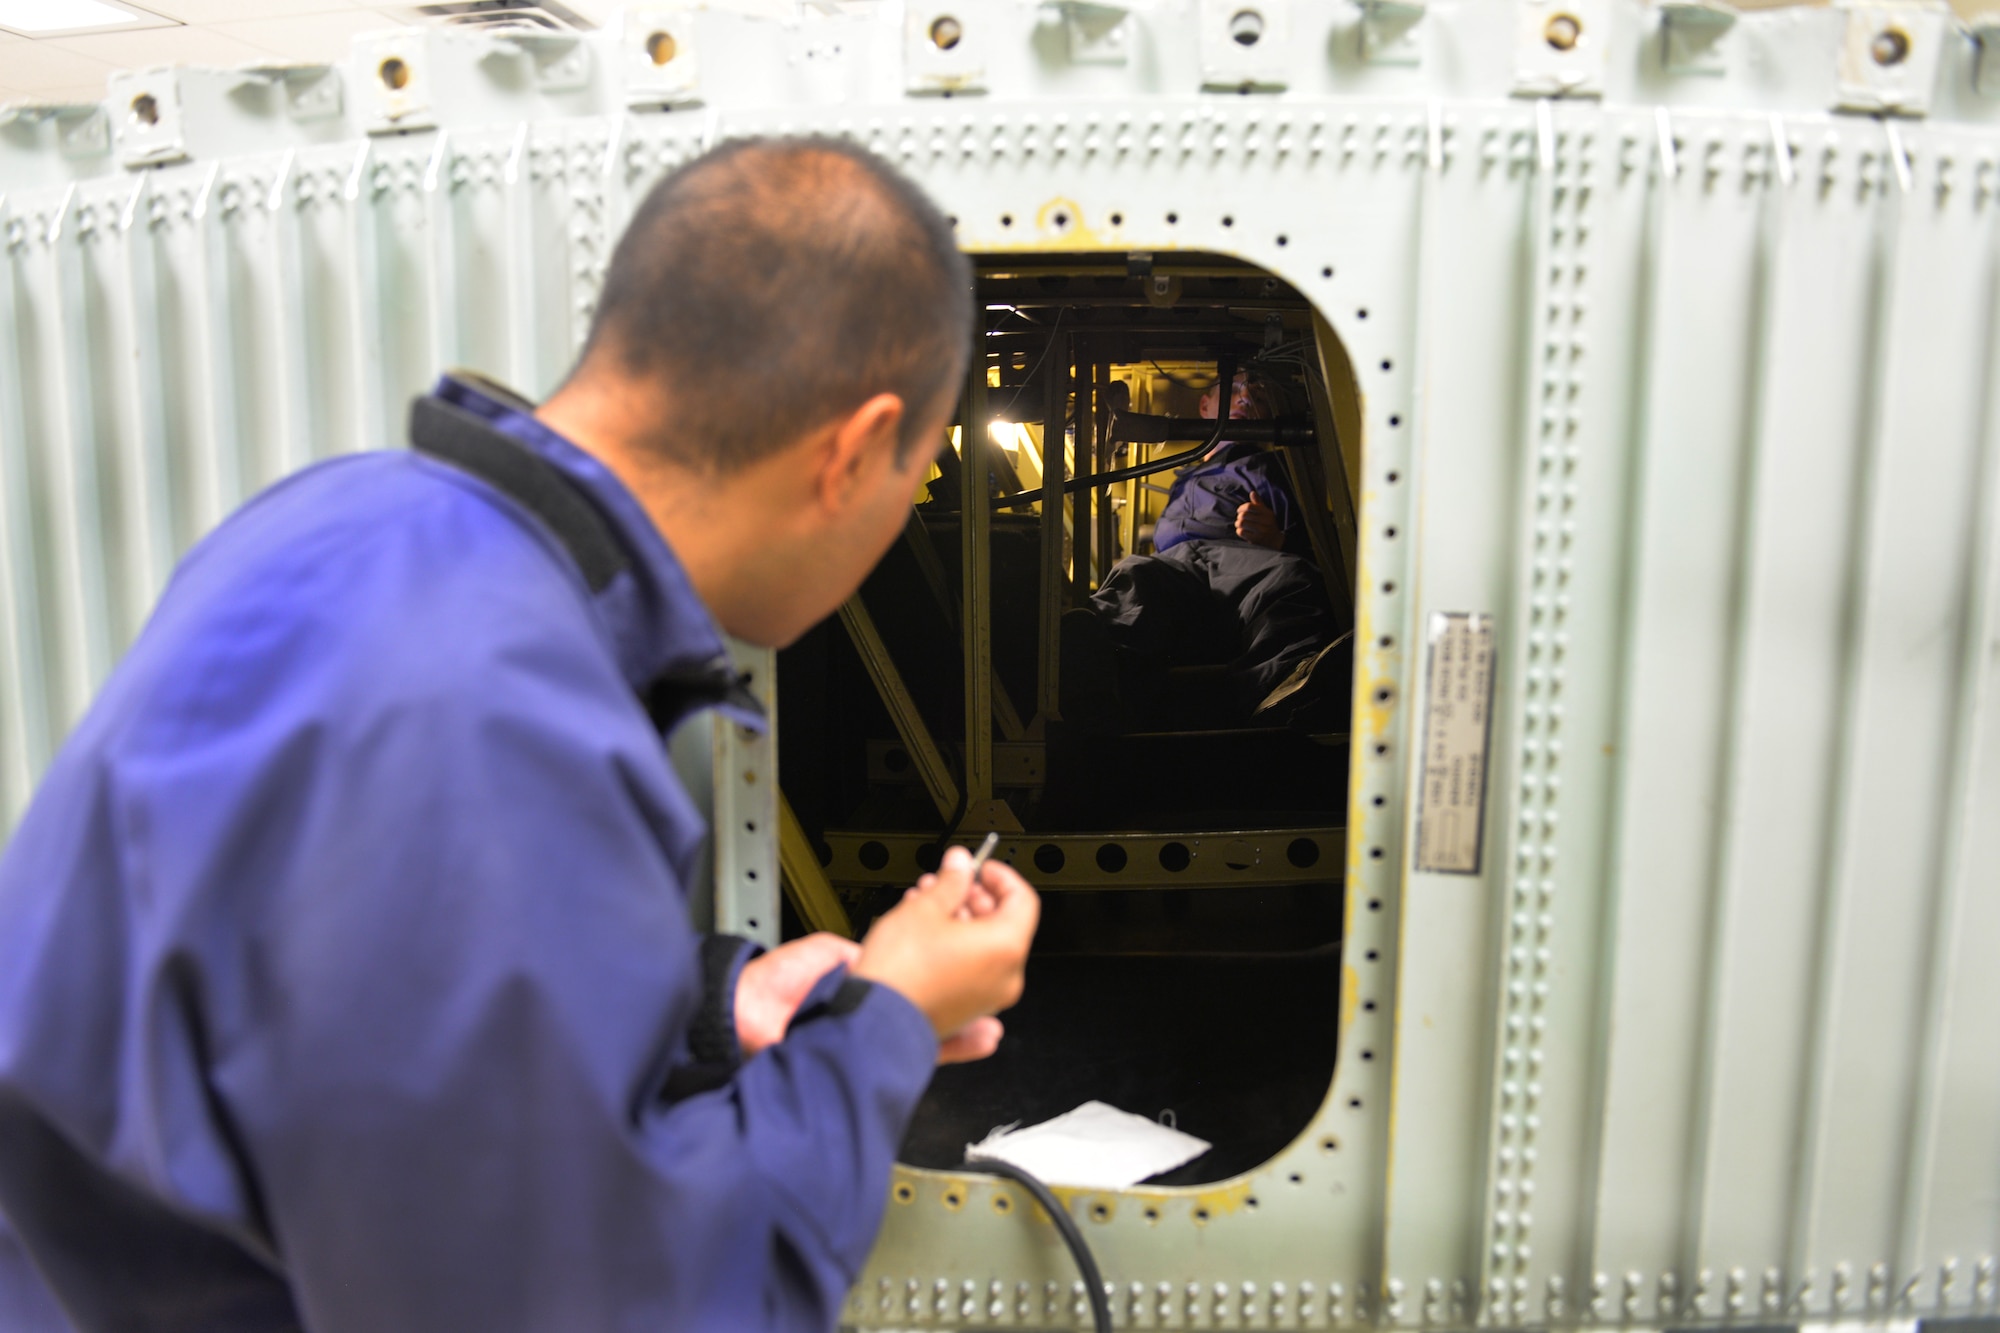 Airman Victor Mendoza 361st Training Squadron aircraft fuel systems apprentice course student learns to diagnose and repair fuel system malfunctions at Sheppard Air Force Base, Texas, July 11, 2017. He supervises are other students remove and replace the No. 2 dump pump in a C-130 wing. (U.S. Air Force photo/Liz H. Colunga)